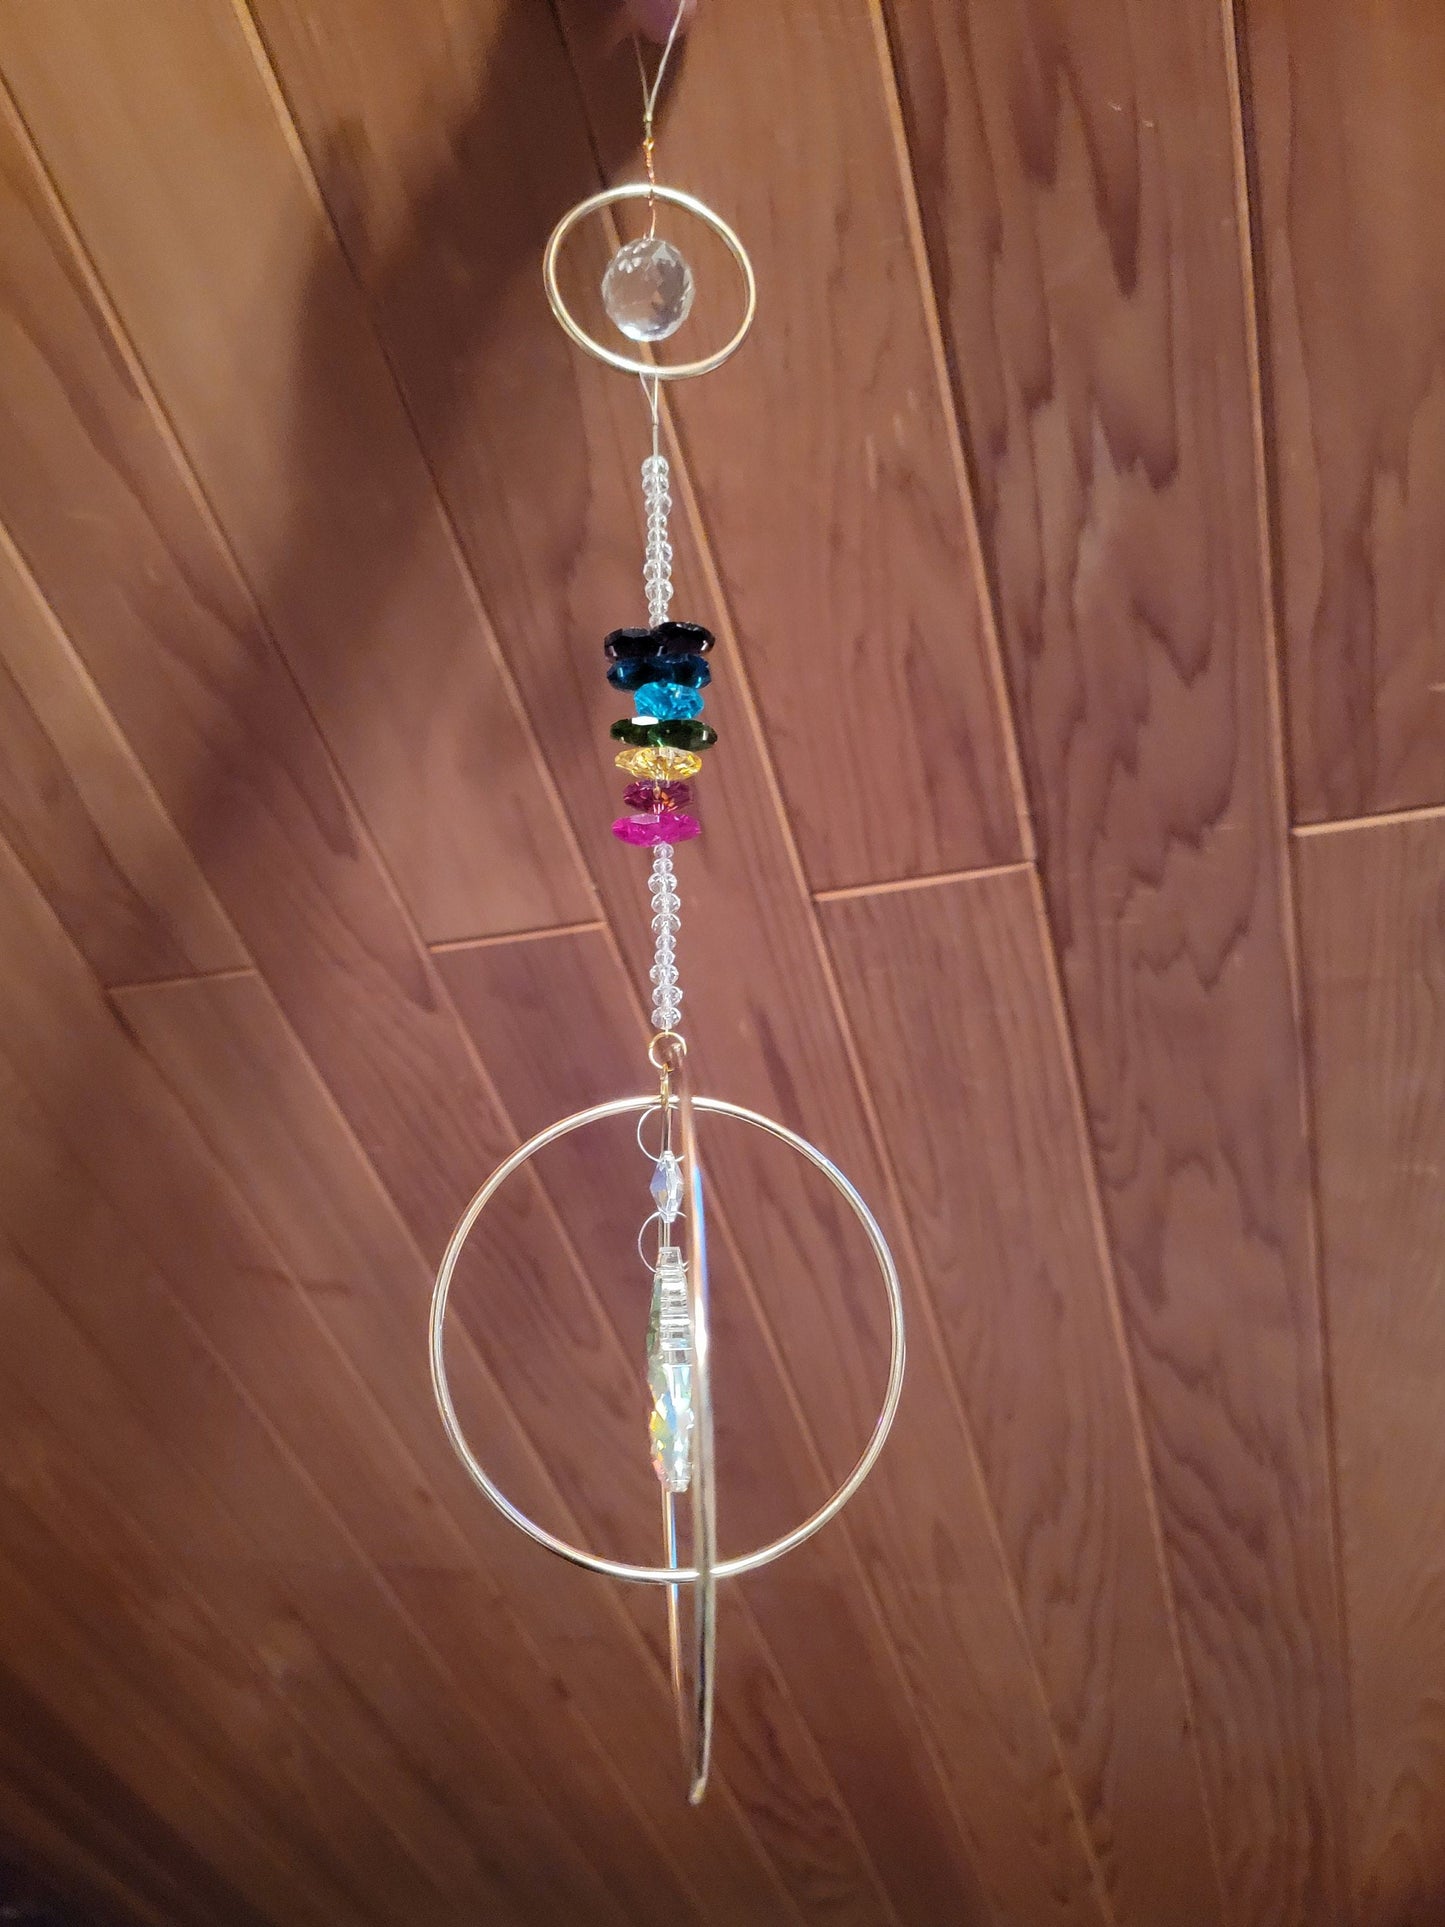 Crystal Sun Catcher Window Prism Hanging Decoration "The Samantha" She's got it all going on.